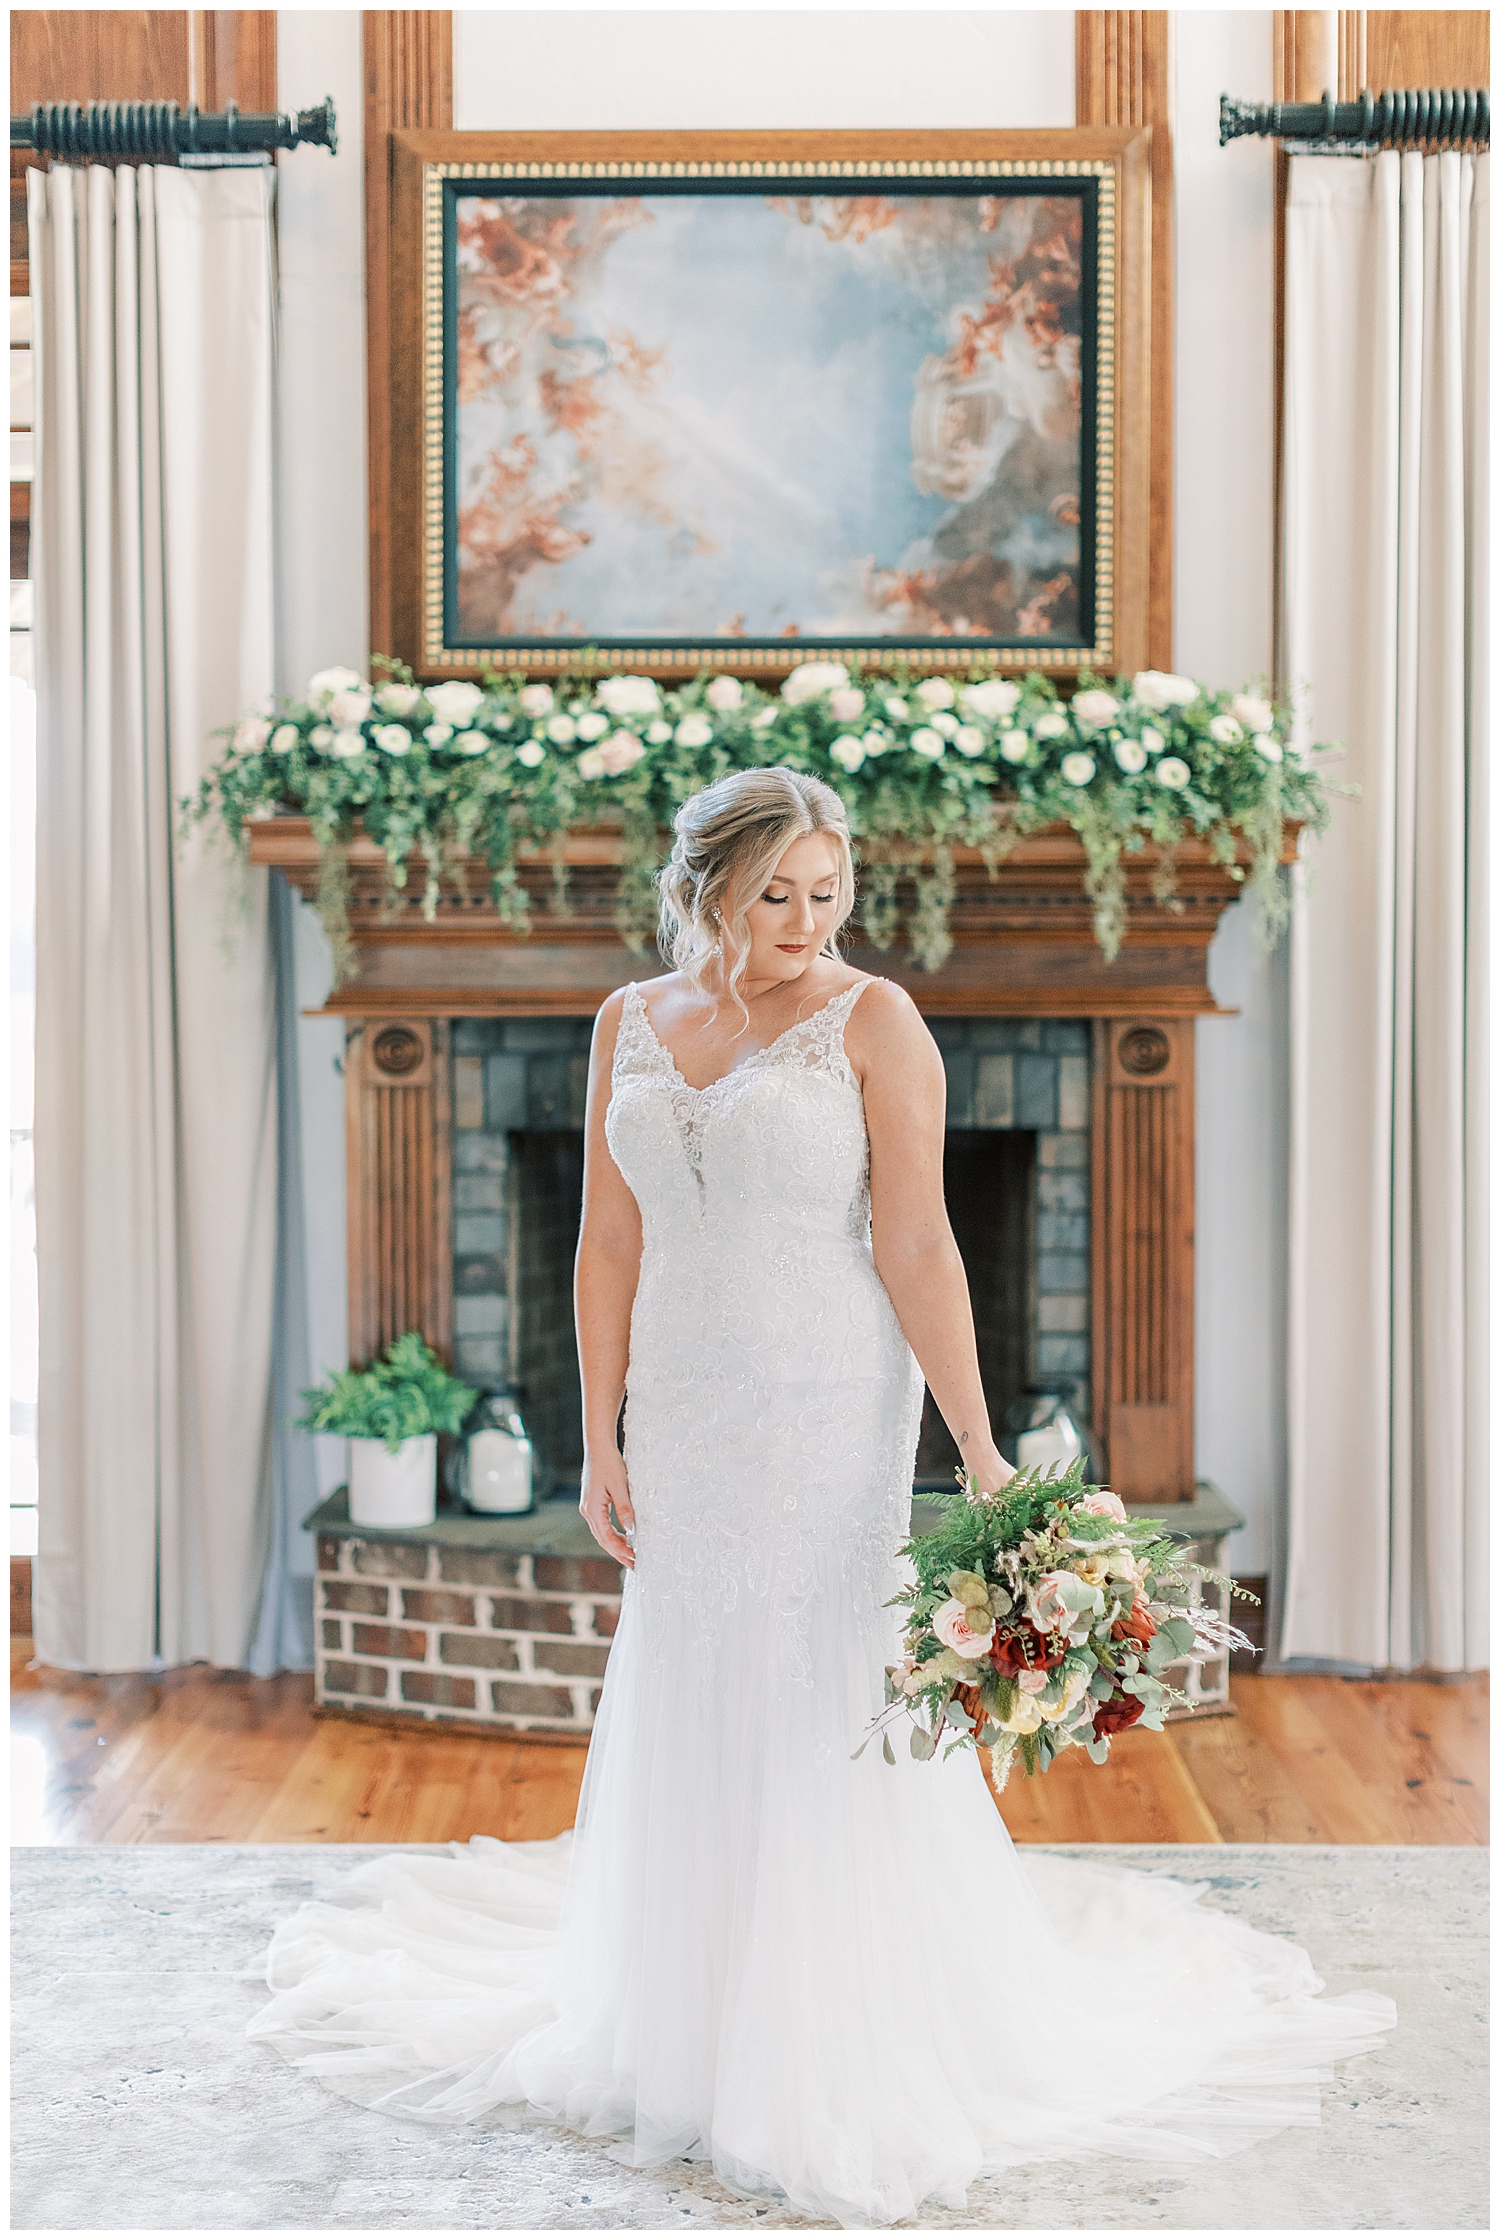 A bride stands in front of the fireplace.